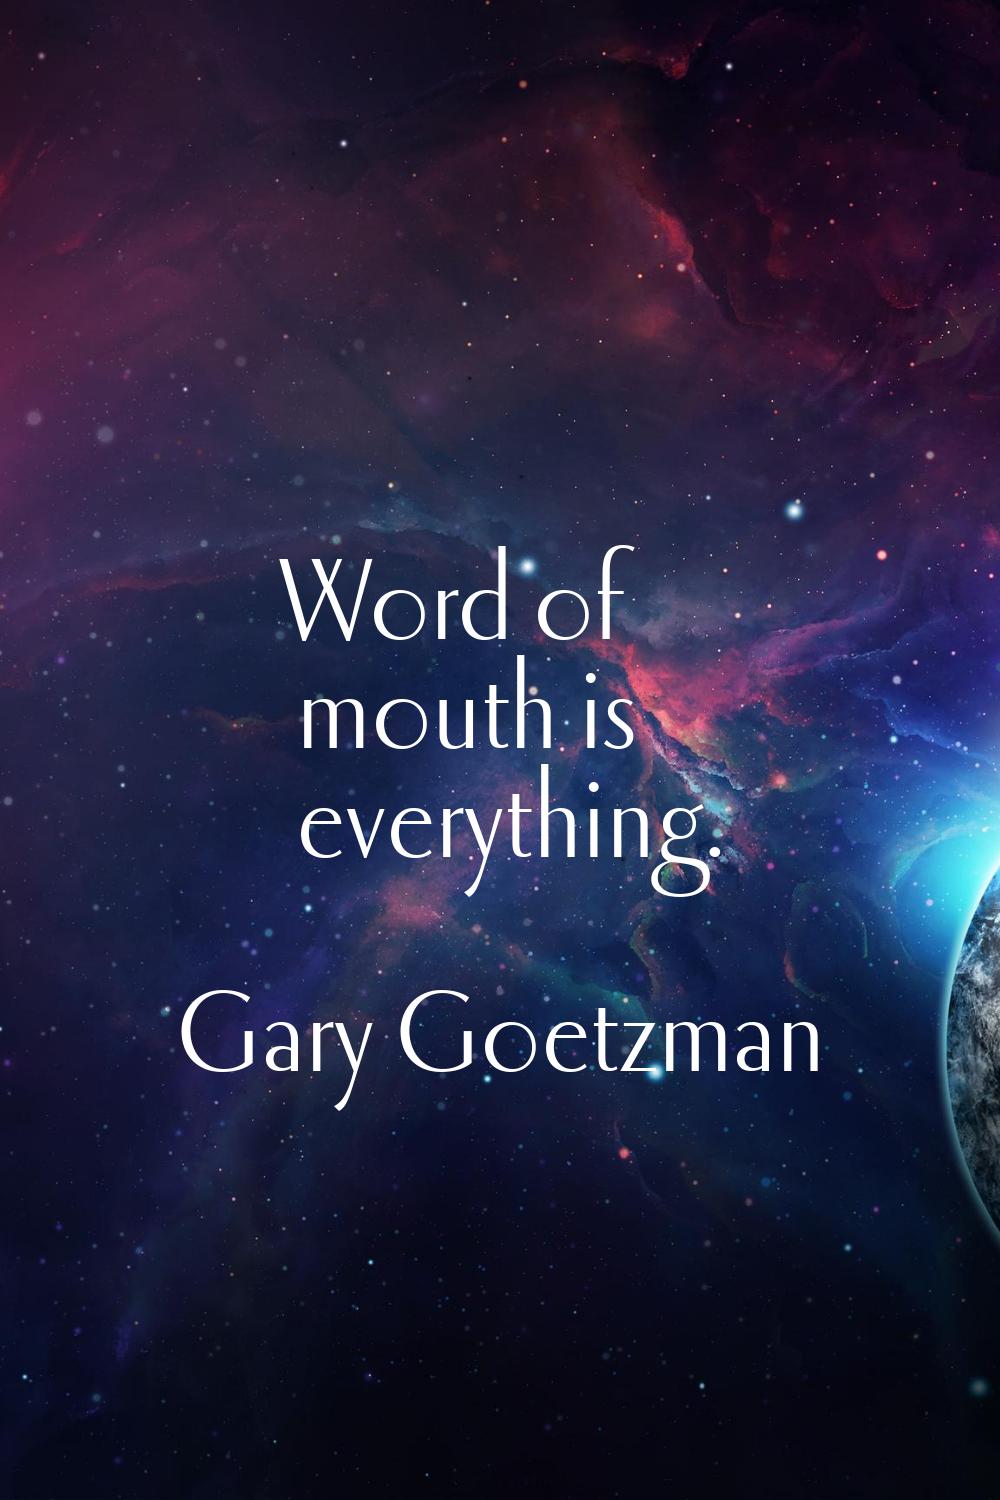 Word of mouth is everything.